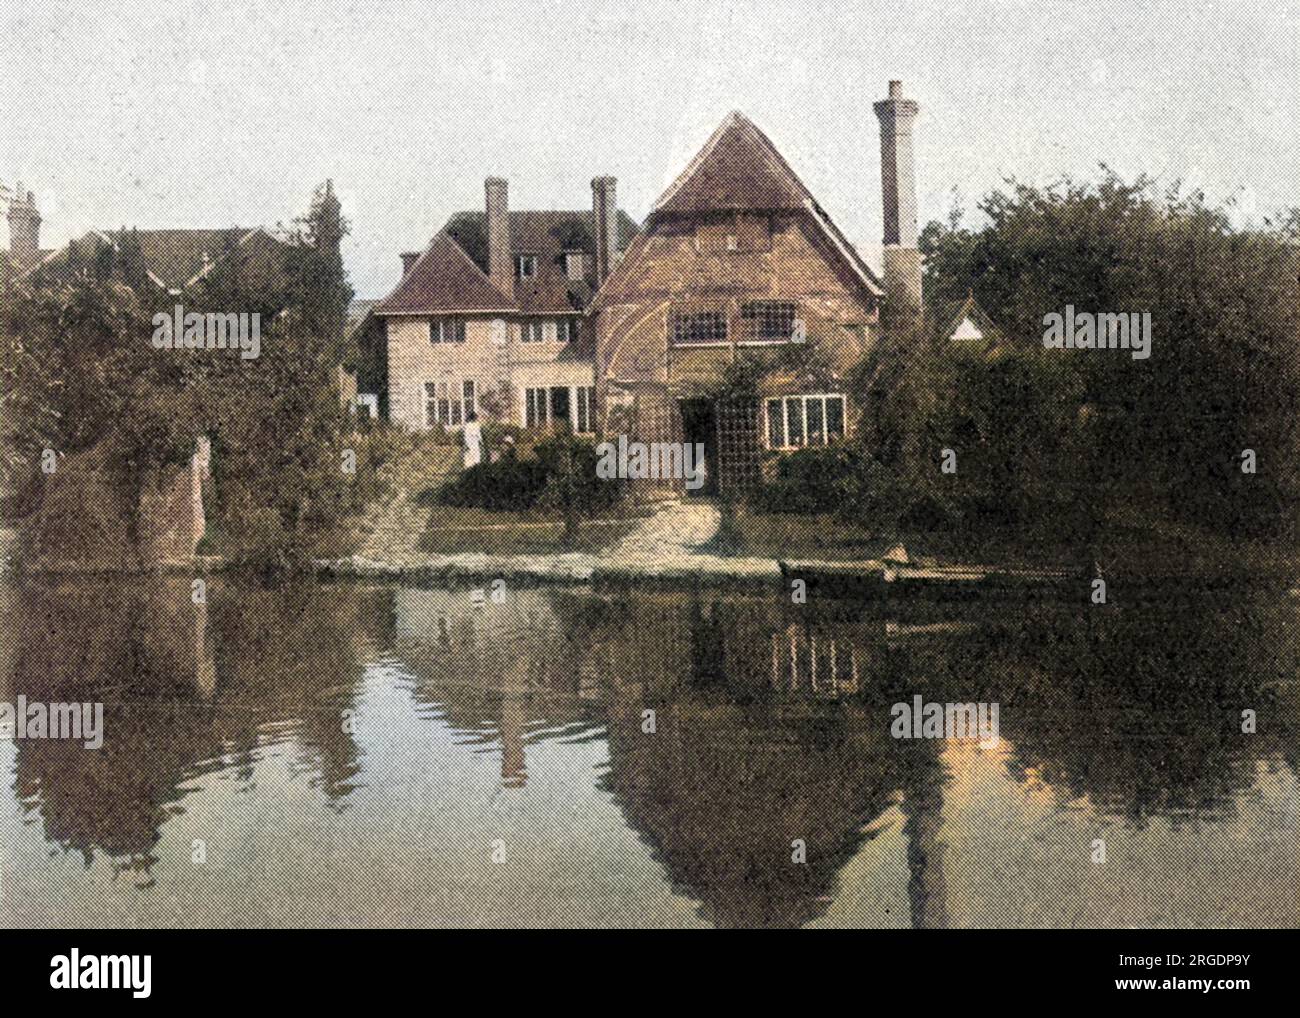 The country retreat of Prime Minister Herbert Asquith at Sutton Courtney, Berkshire (now in Oxfordshire after boundary changes in 1974).  n 1912 the Prime Minister H. H. Asquith chose The Wharf (which he built in 1913) and the adjoining Walton House for his country residence. Asquith and his large family spent weekends at The Wharf where his wife Margot held court over bridge and tennis. She converted the old barn directly on the river which served for accommodation for the overflow of her many weekend parties. A painting of the period by Sir John Lavery (now in the Hugh Lane Gallery in Dublin Stock Photo